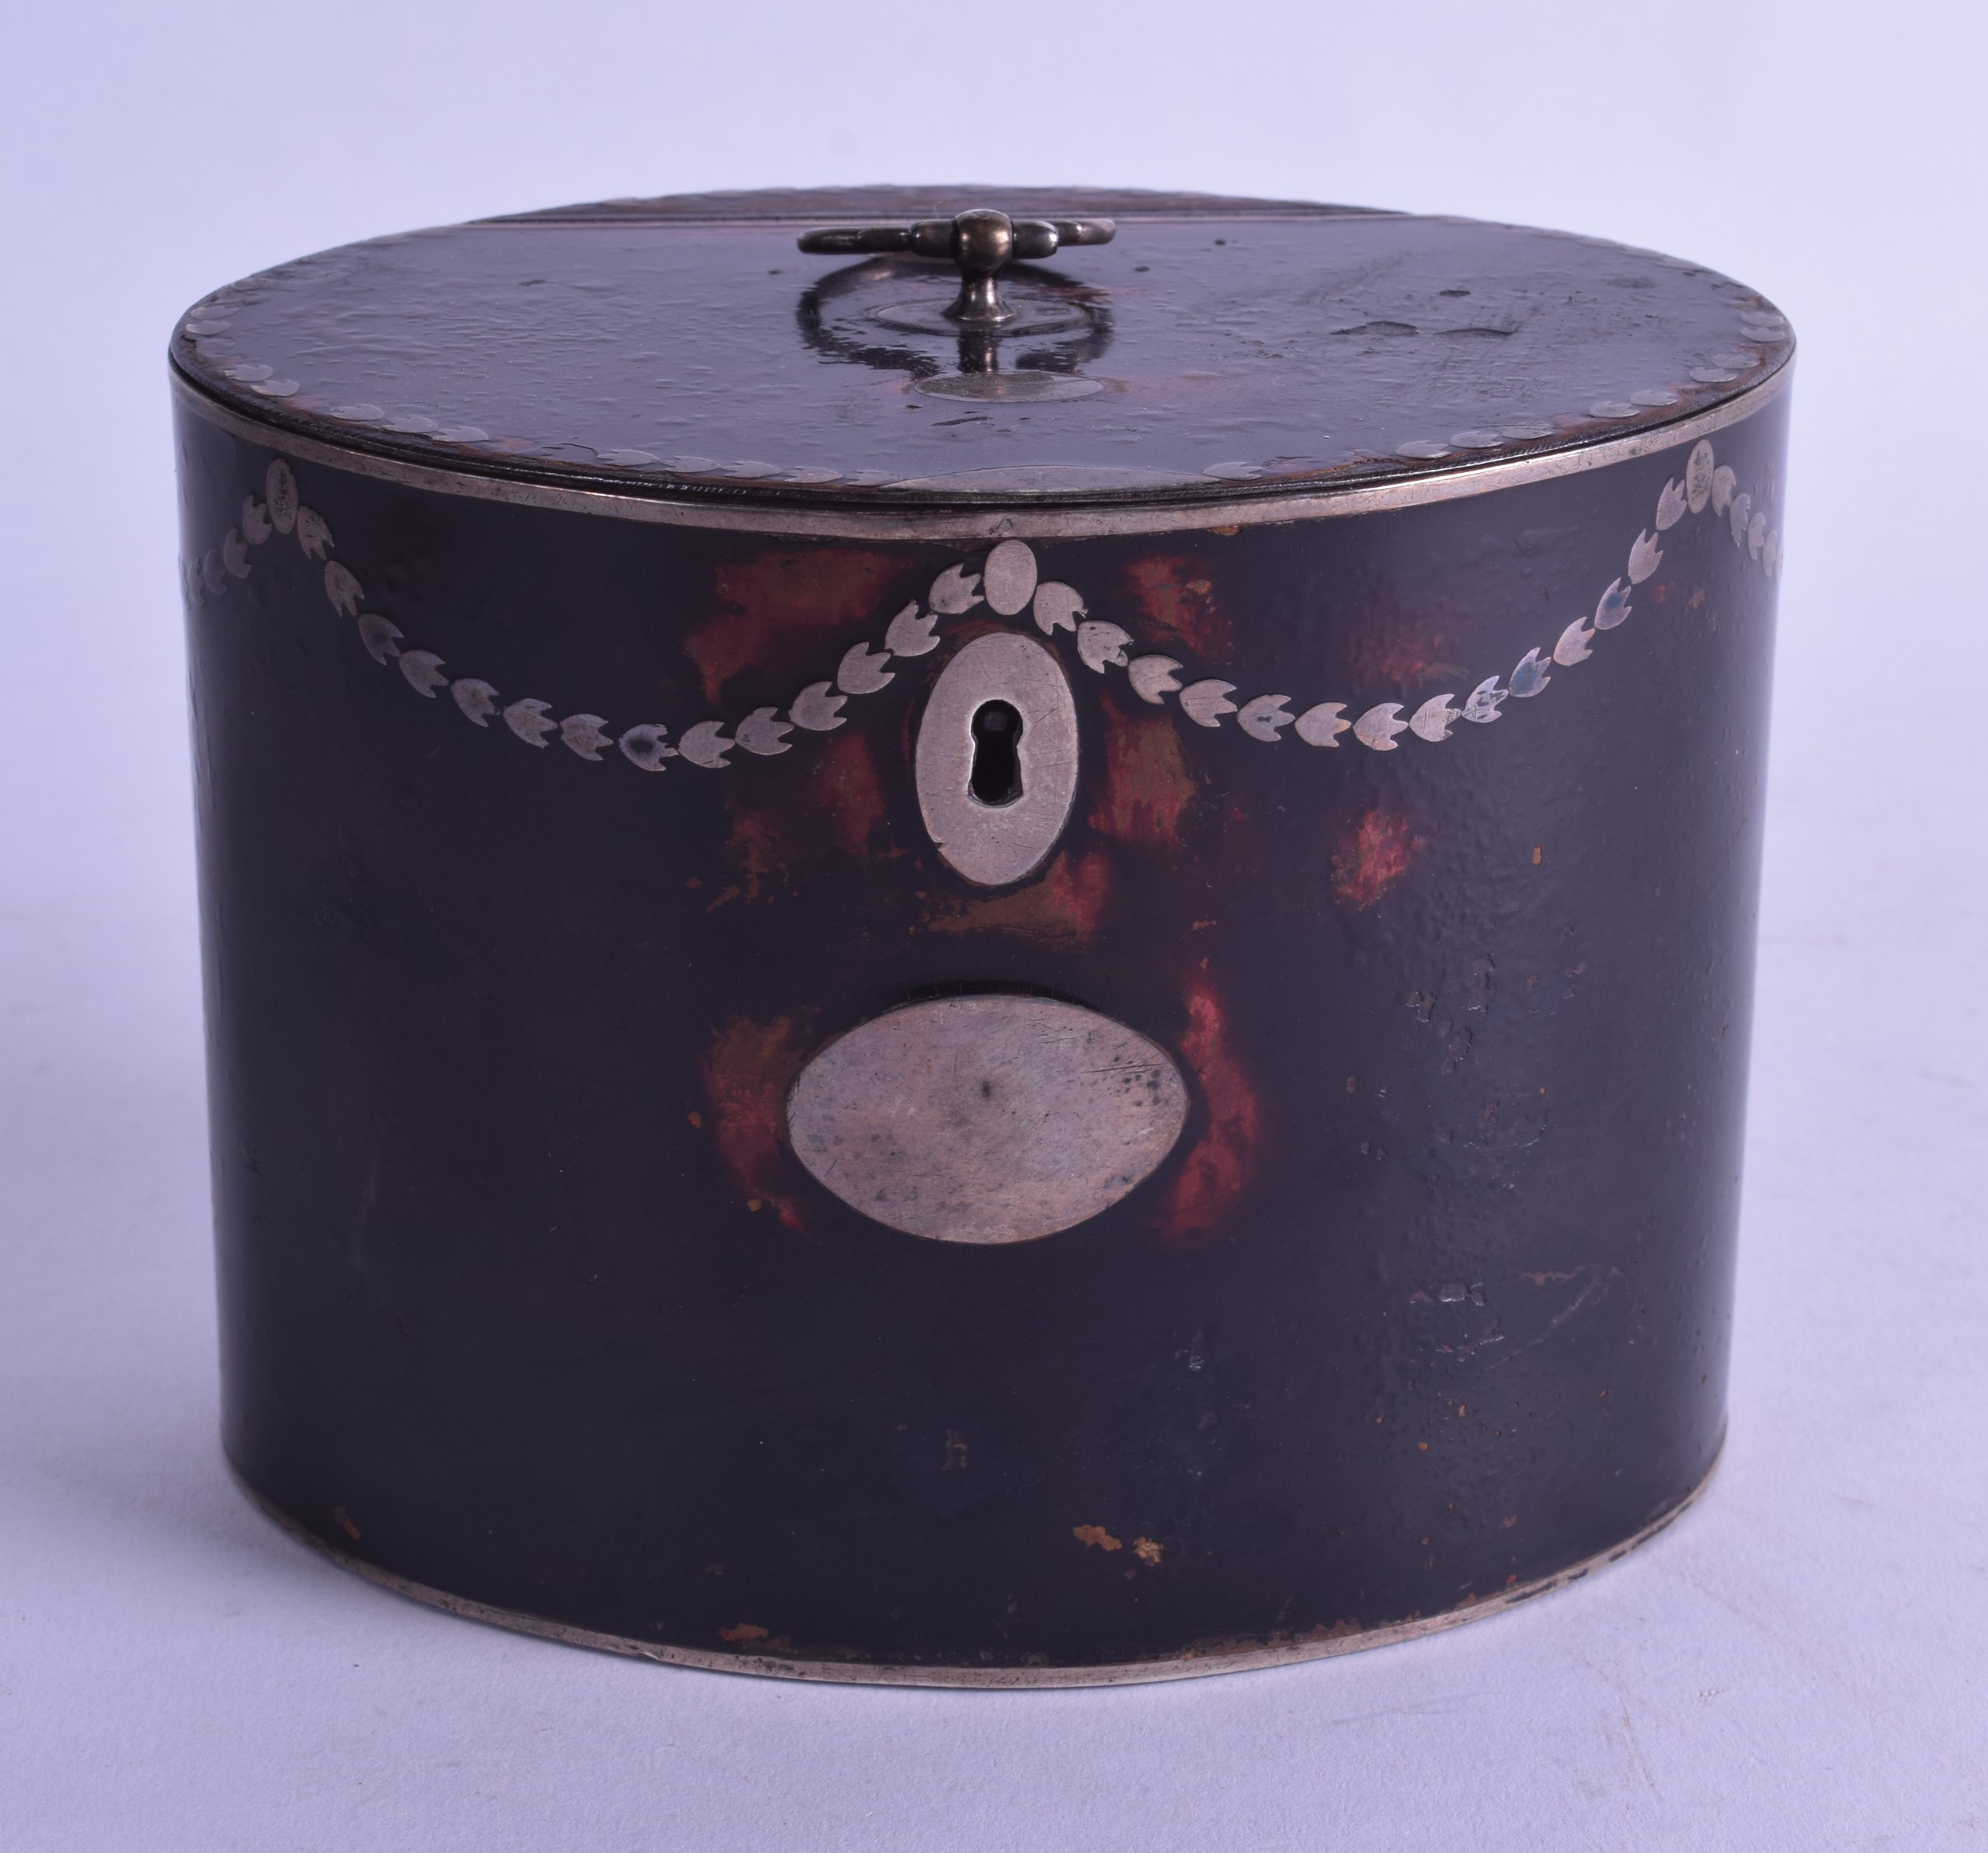 A RARE REGENCY SILVER INLAID IMITATION TORTOISESHELL TIN TEA CADDY decorated with classical vines.